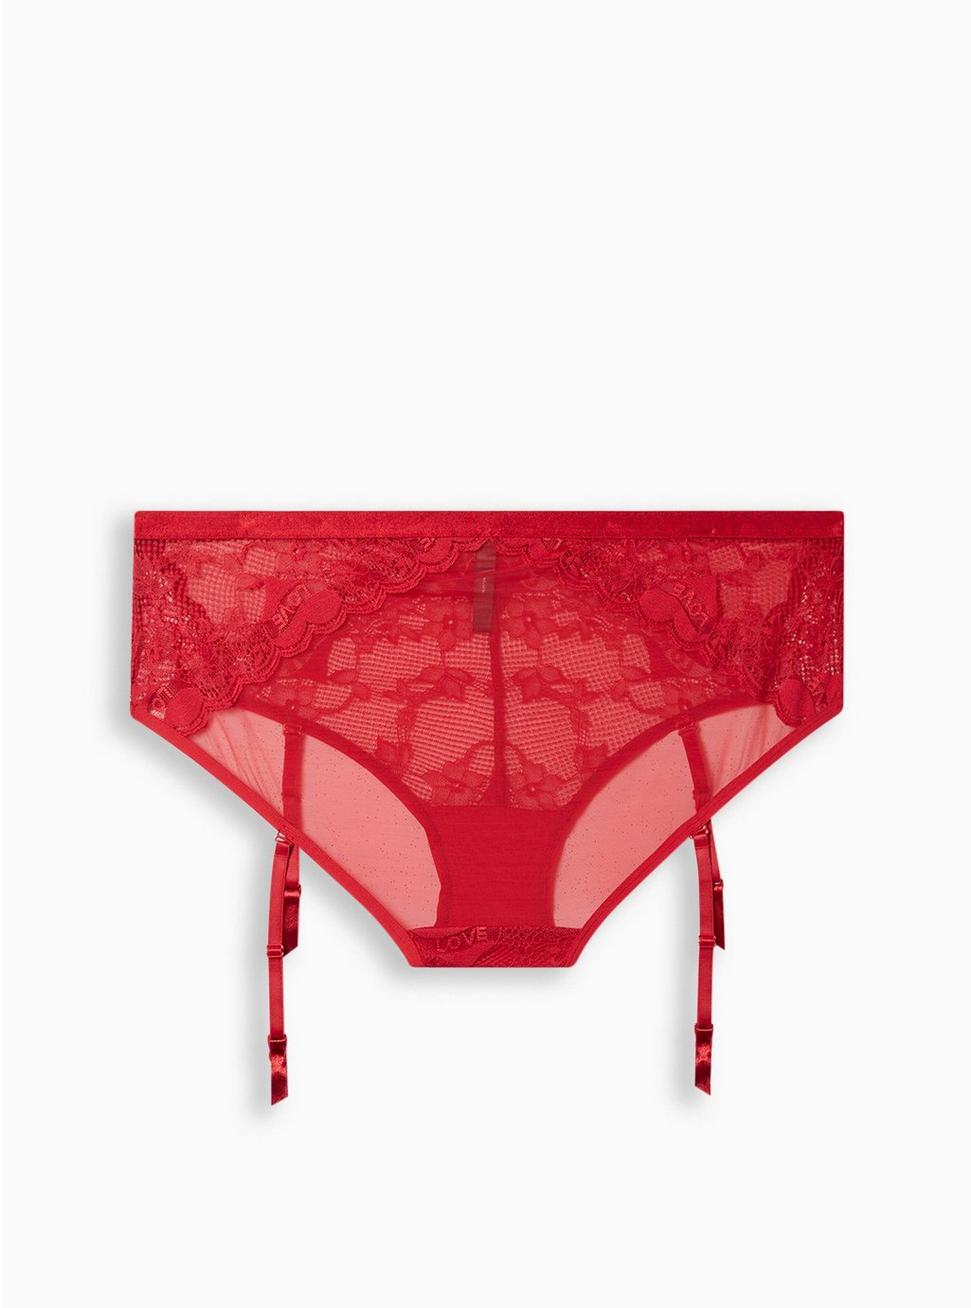 Tattoo Lace Mid-Rise Hipster Panty, JESTER RED, hi-res